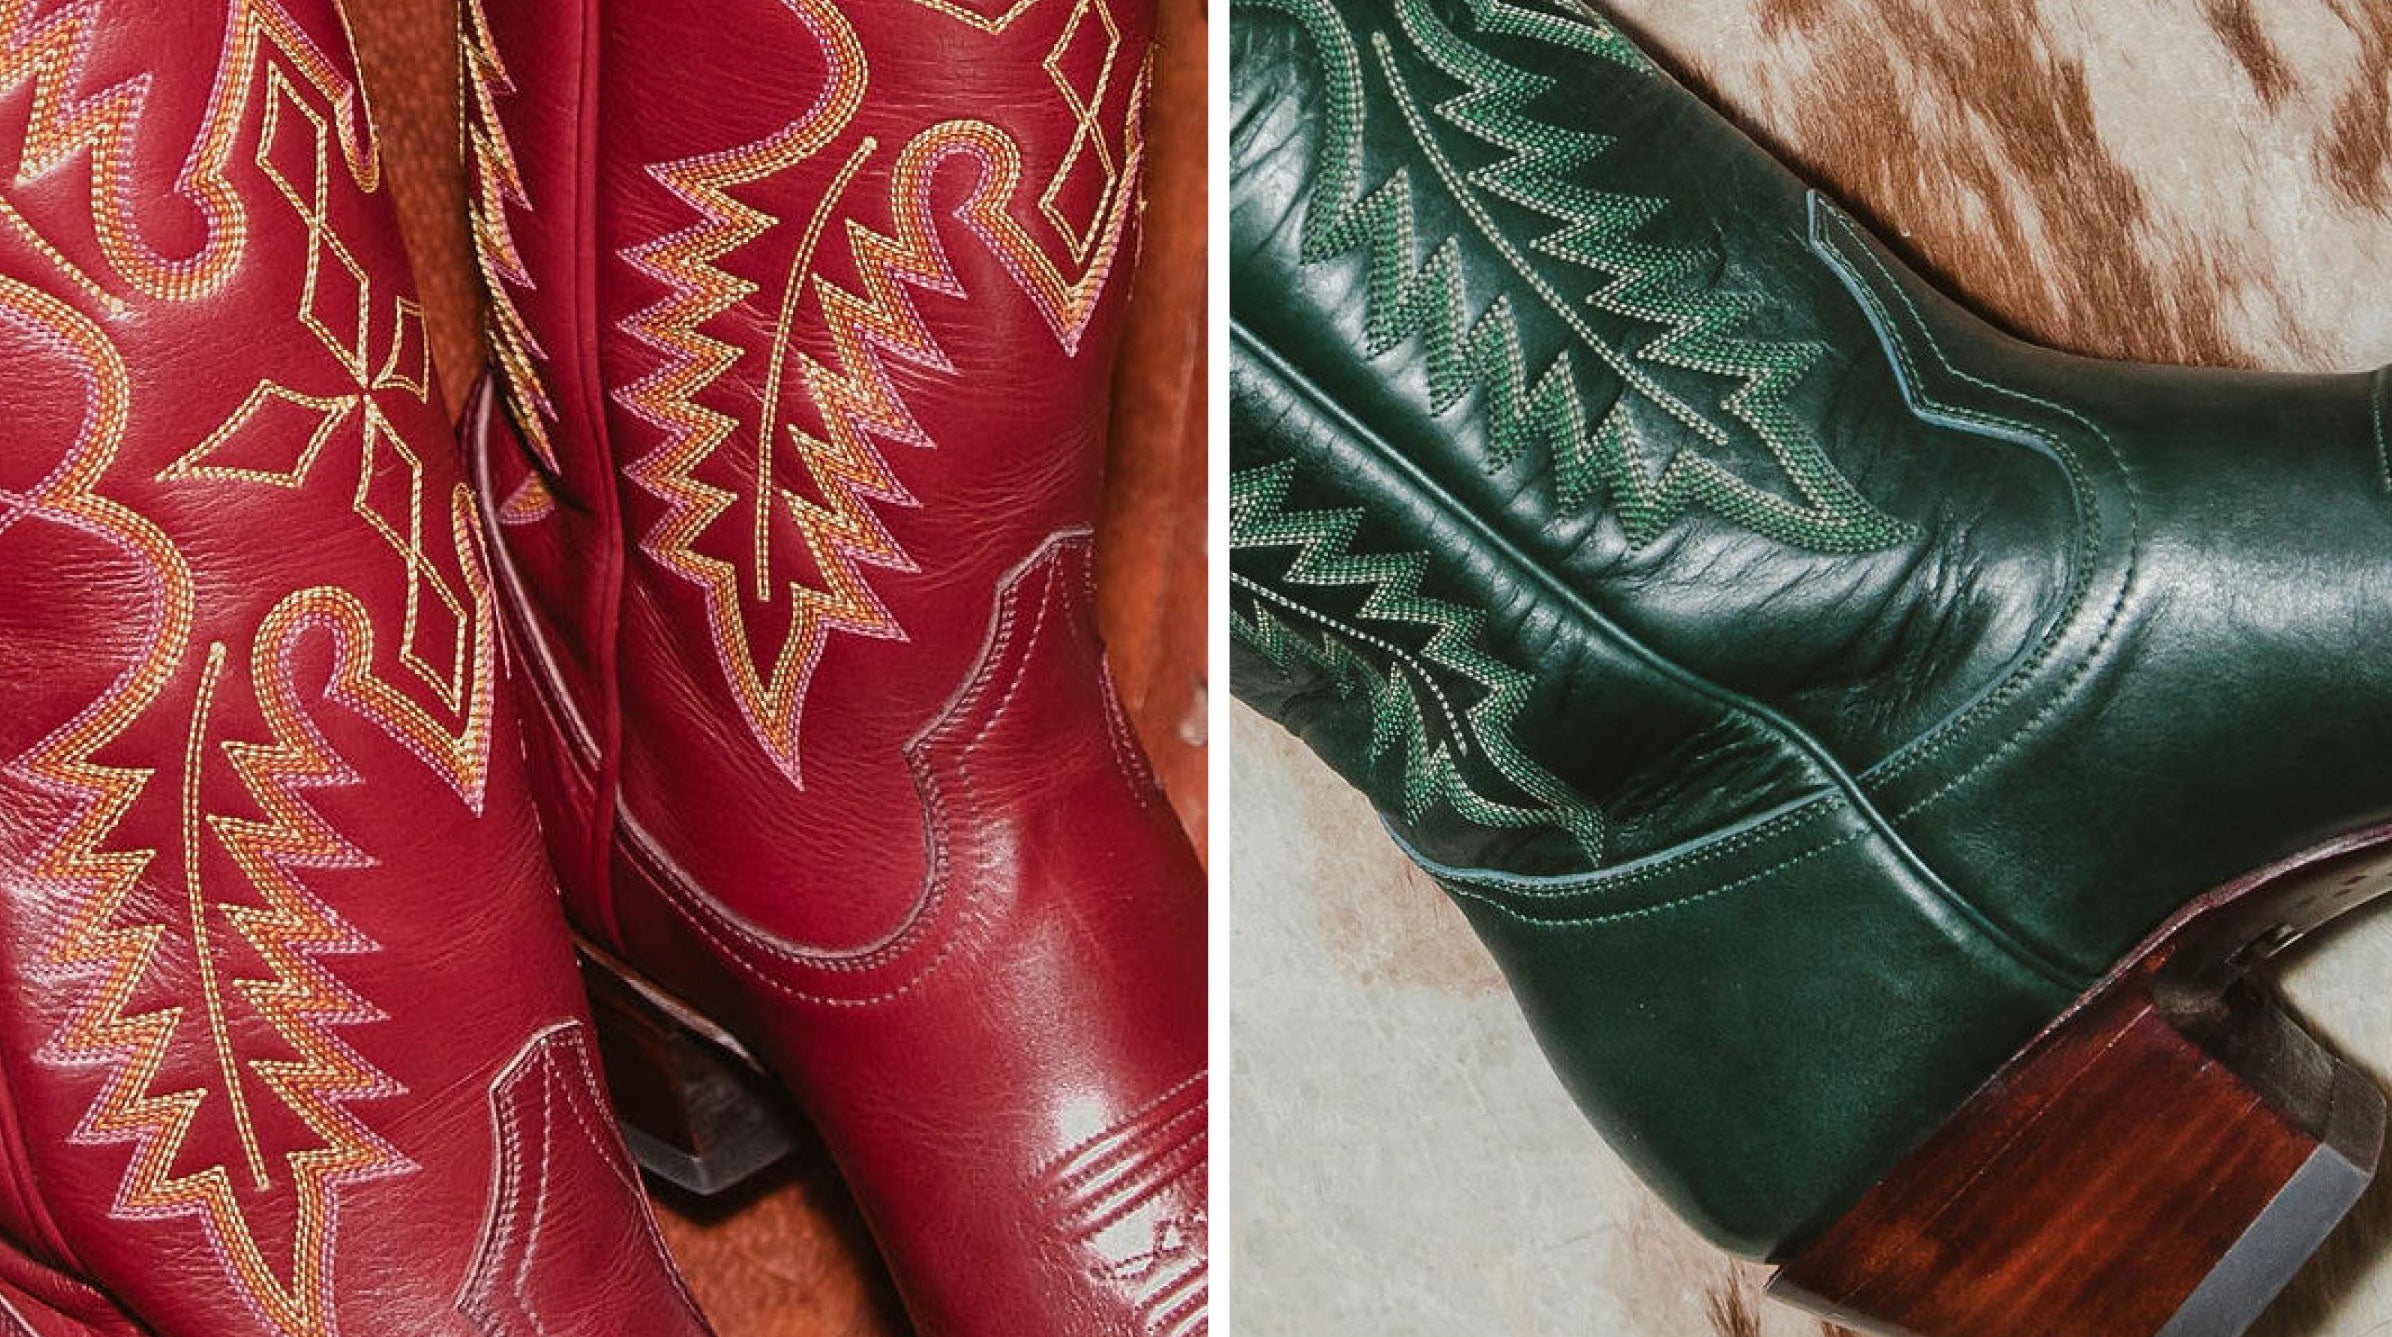 CITY Boots Red & Green Fall Cowboy Boots